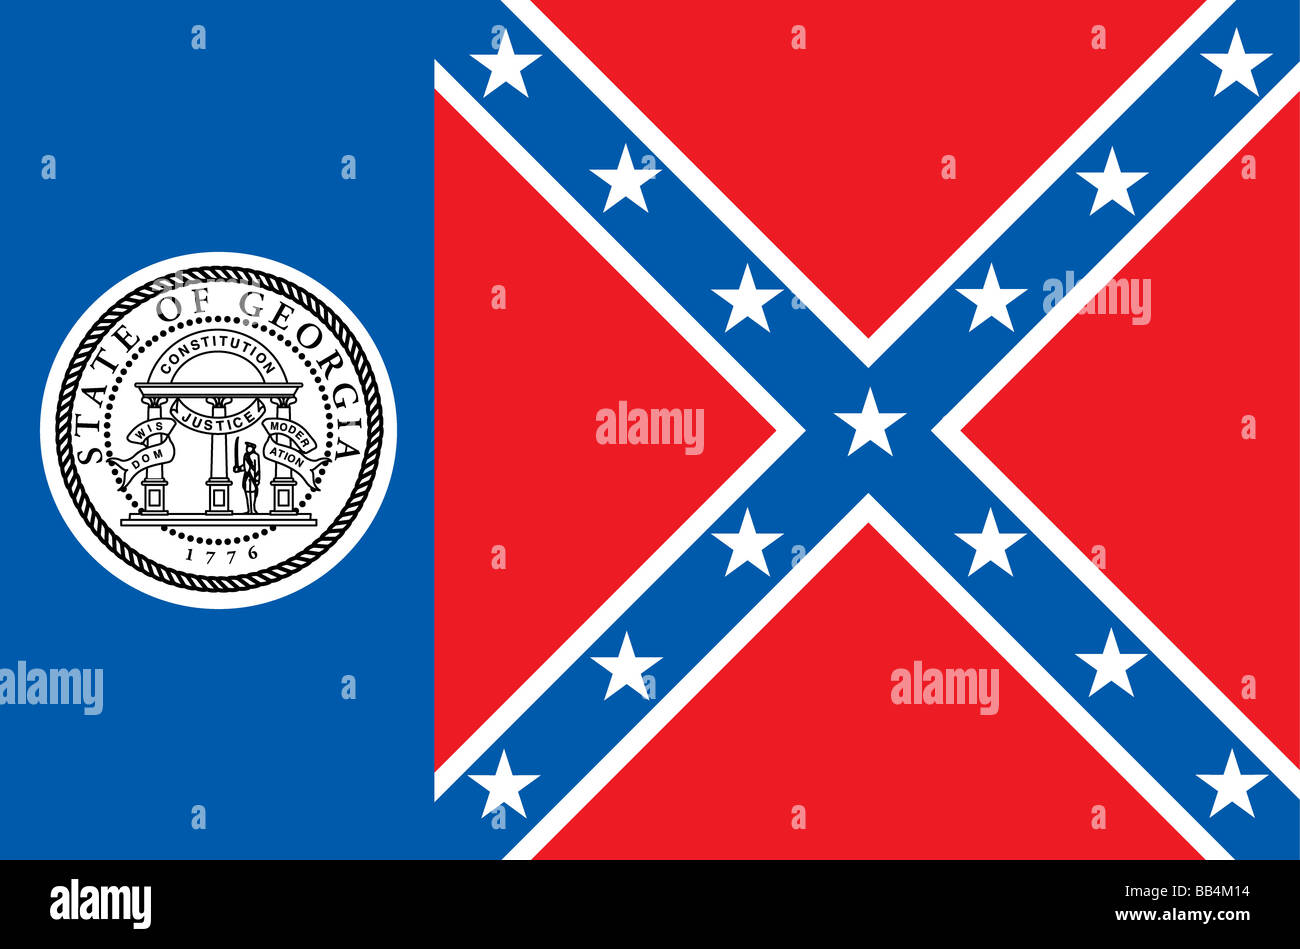 Historical flag of Georgia, a state in the southern United States of America, from July 1, 1956, to January 31, 2001. Stock Photo